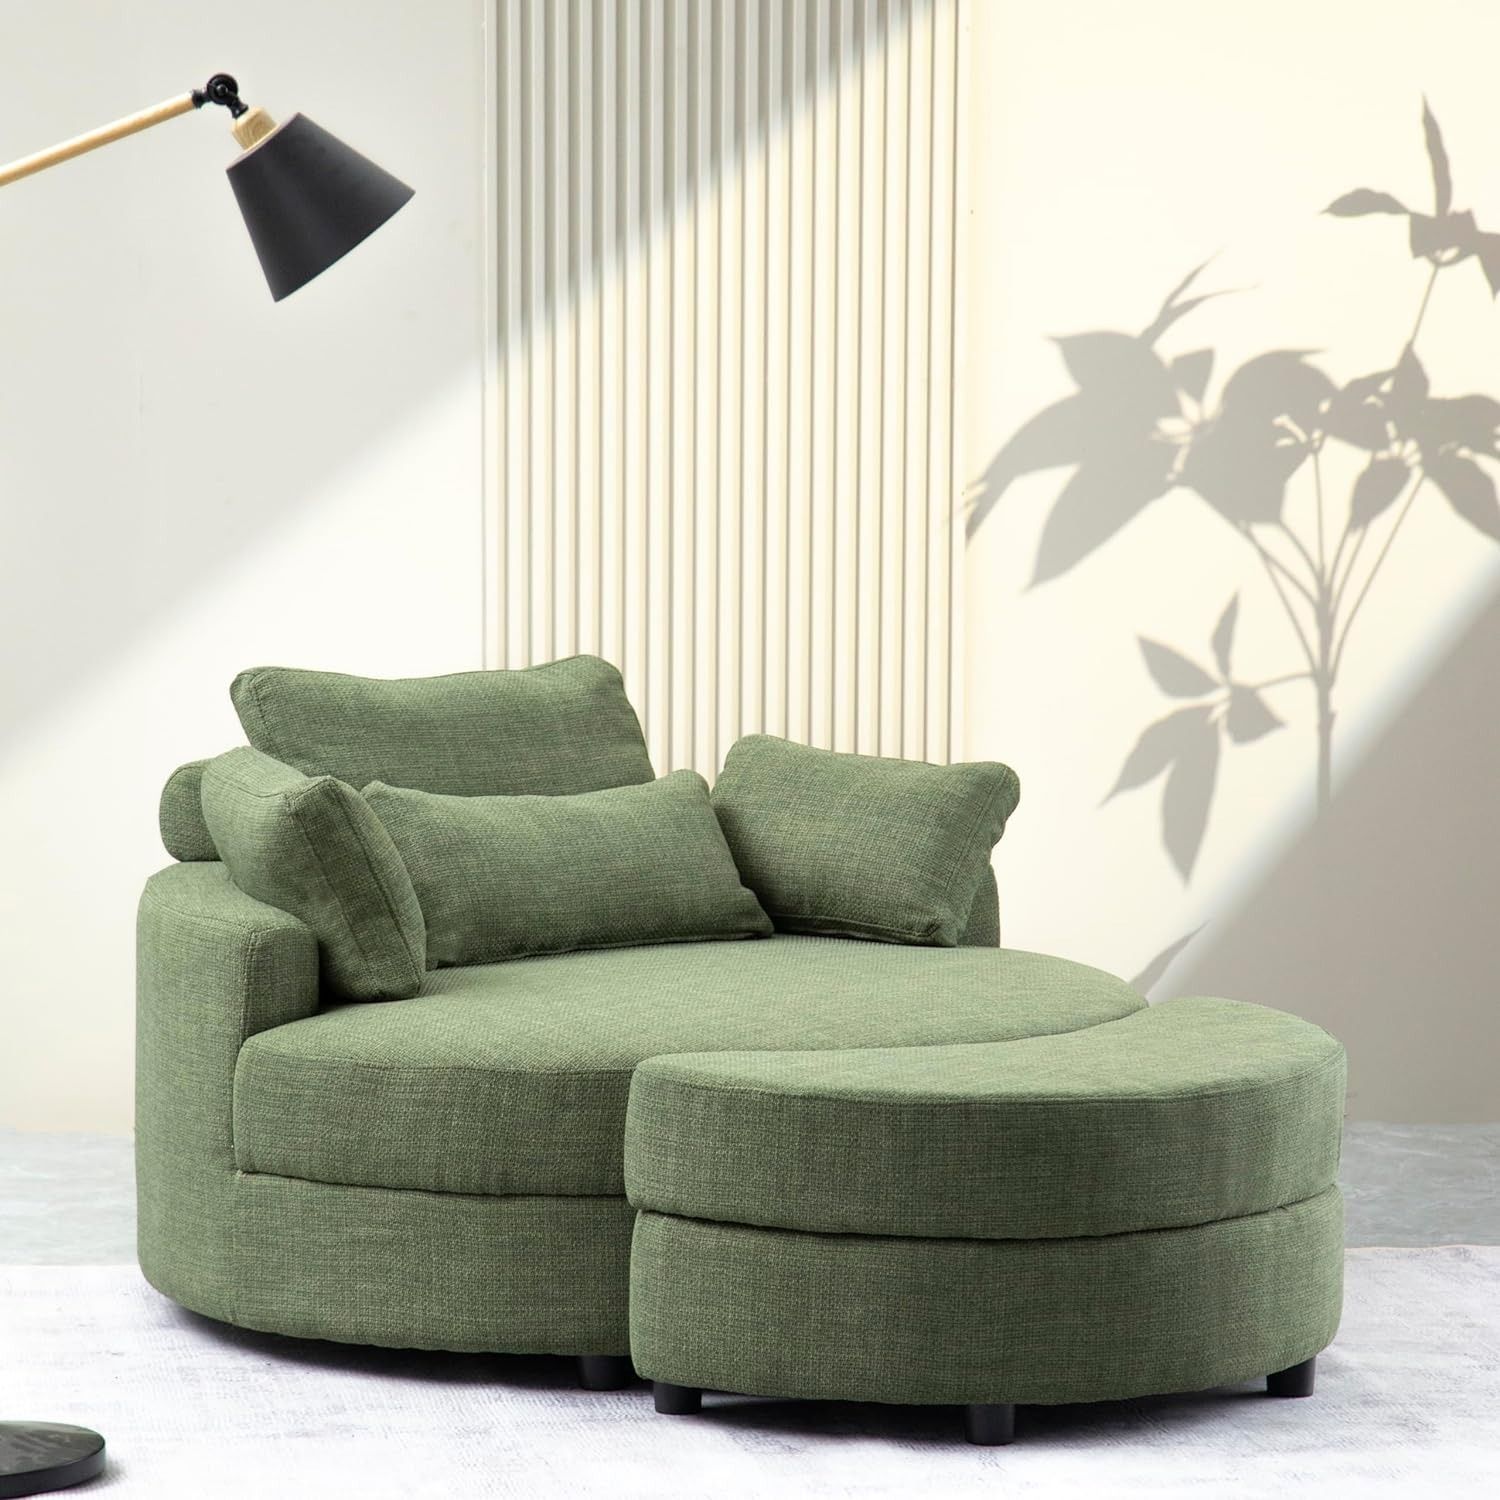 an oversized green round armchair with a matching half moon ottoman